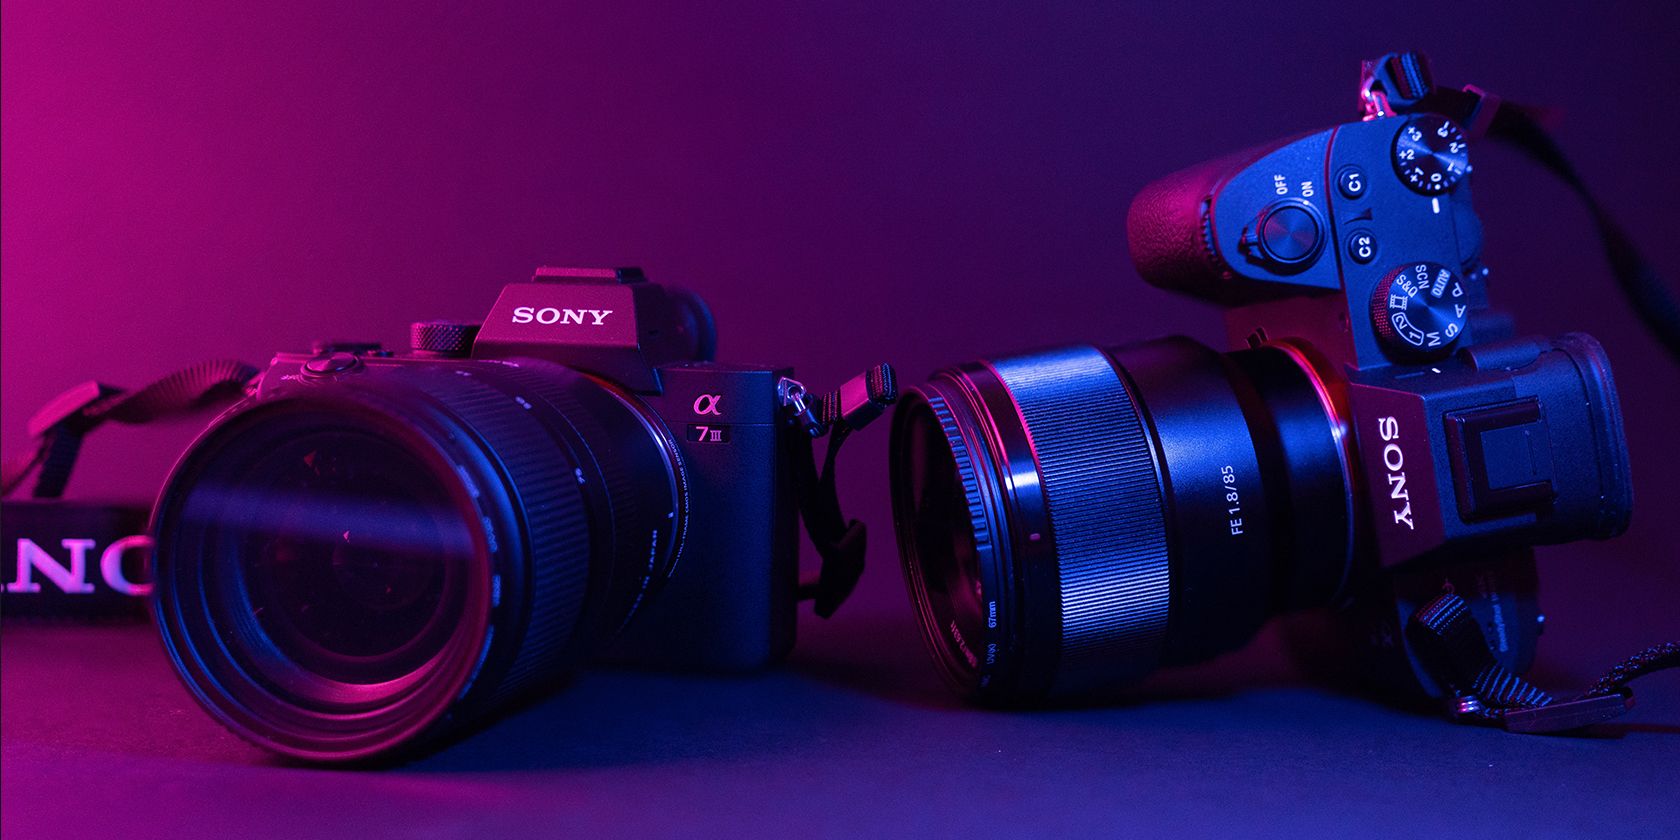 Two Sony a7iiis in magenta and blue lighting